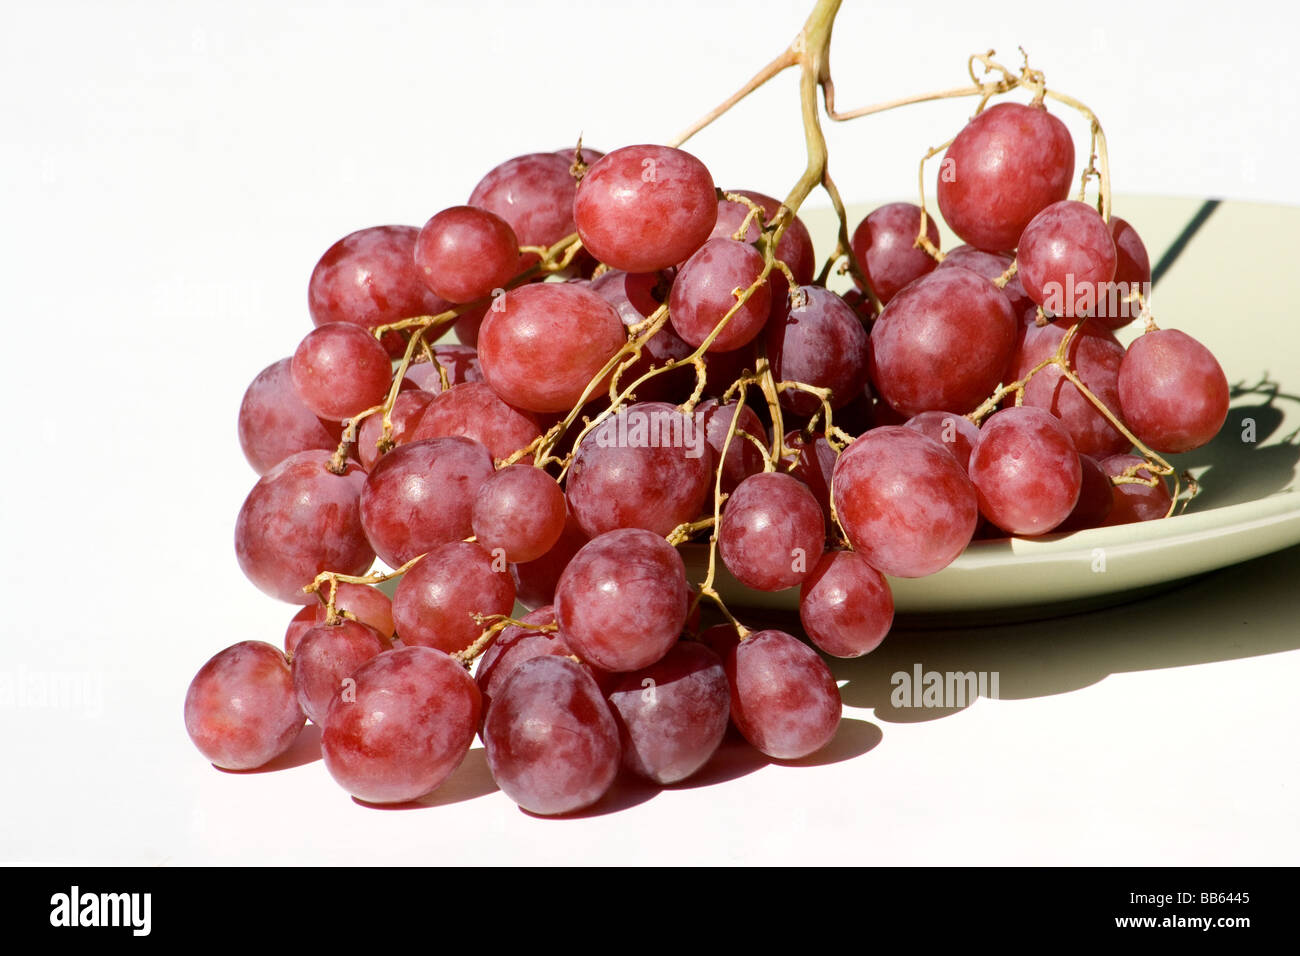 Cluster of red grapes in a plate on white background Stock Photo